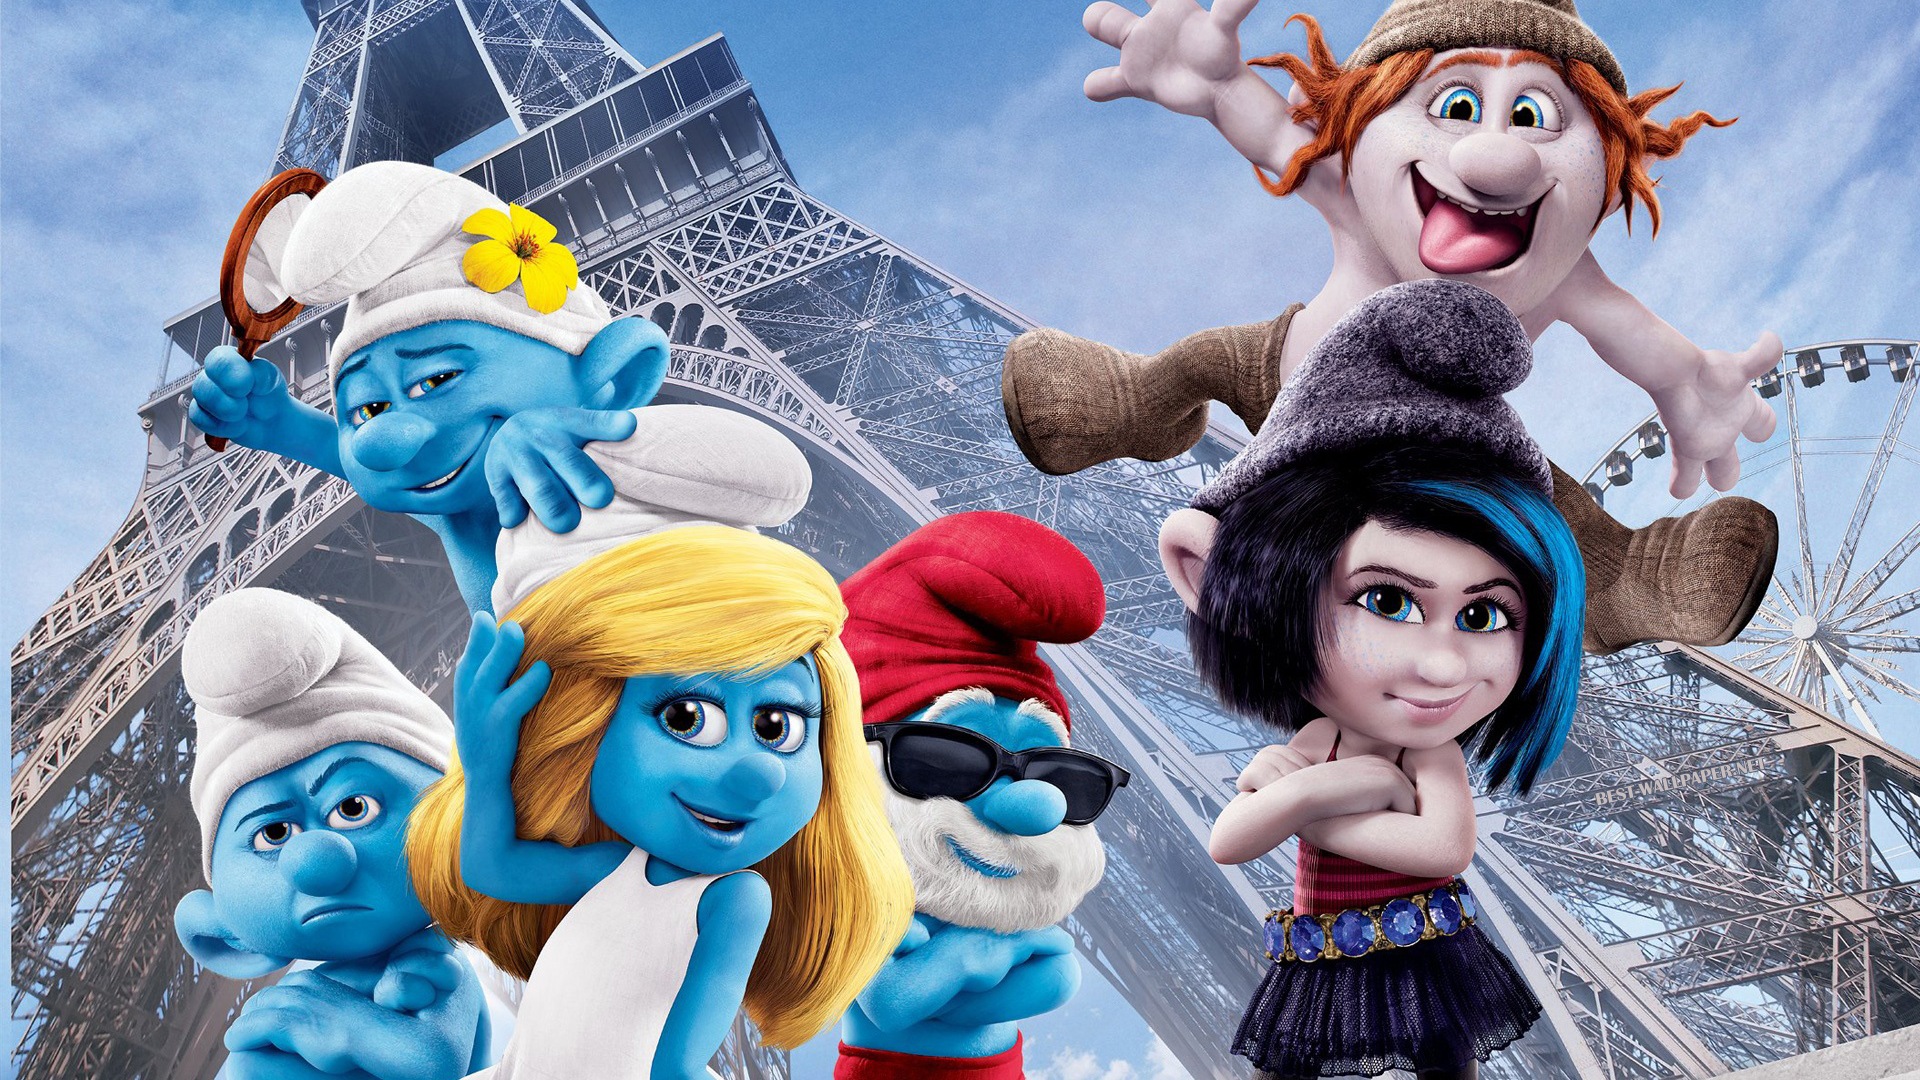 The Smurfs 2 HD movie wallpapers #1 - 1920x1080